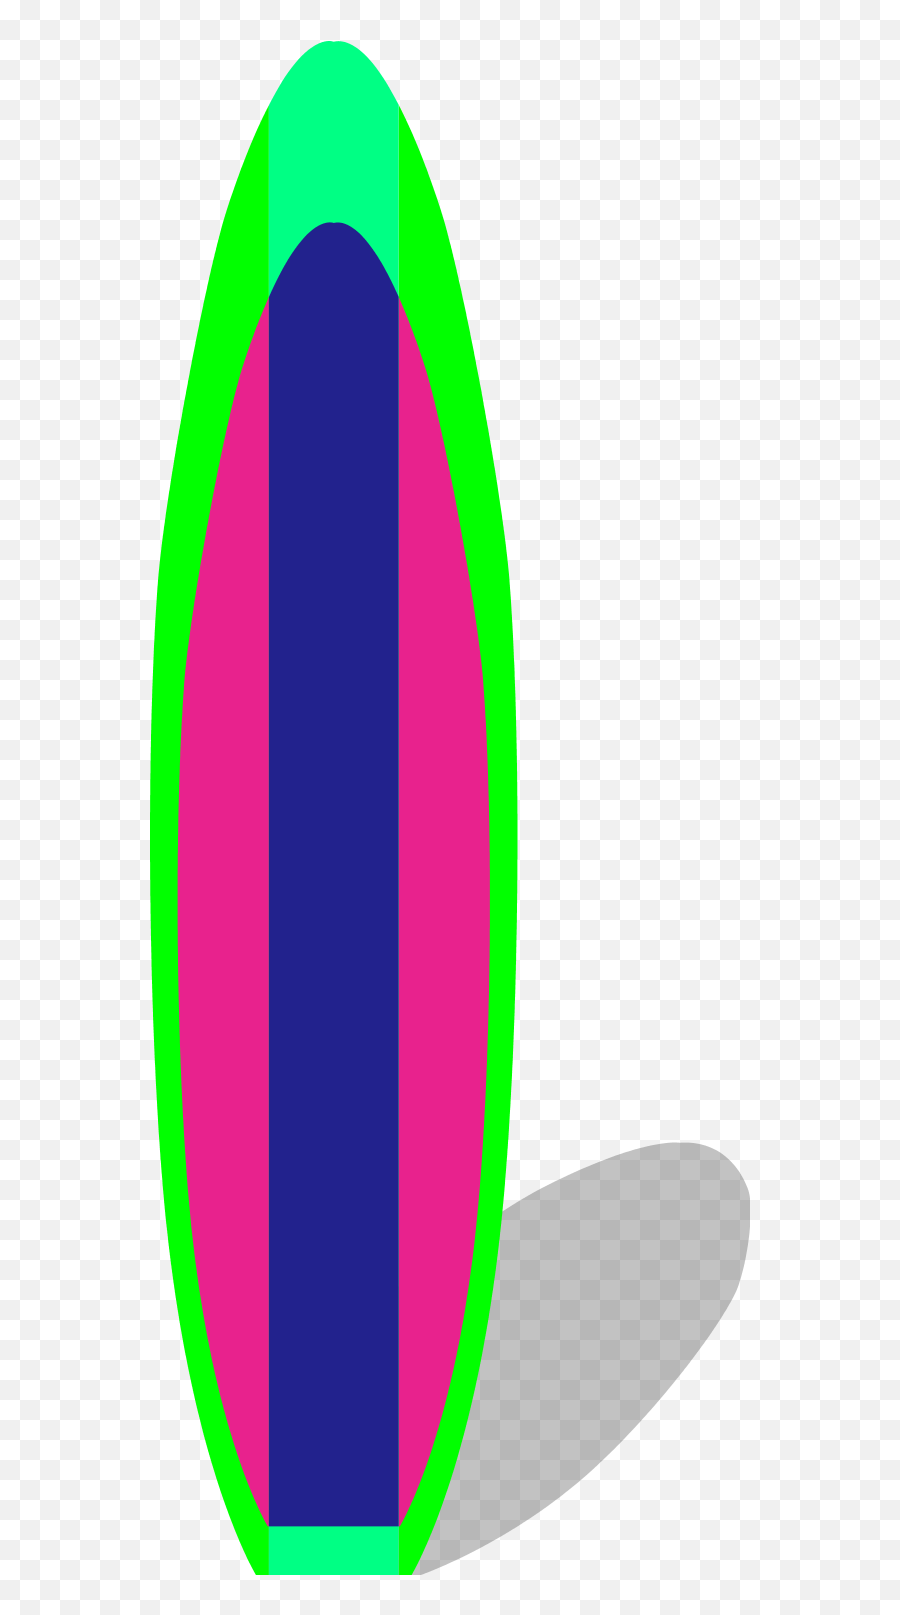 Surfboard Clipart Green And Yellow - Clip Art Library Surfboard Clipart Transparent Background Emoji,Surfboard Emojis